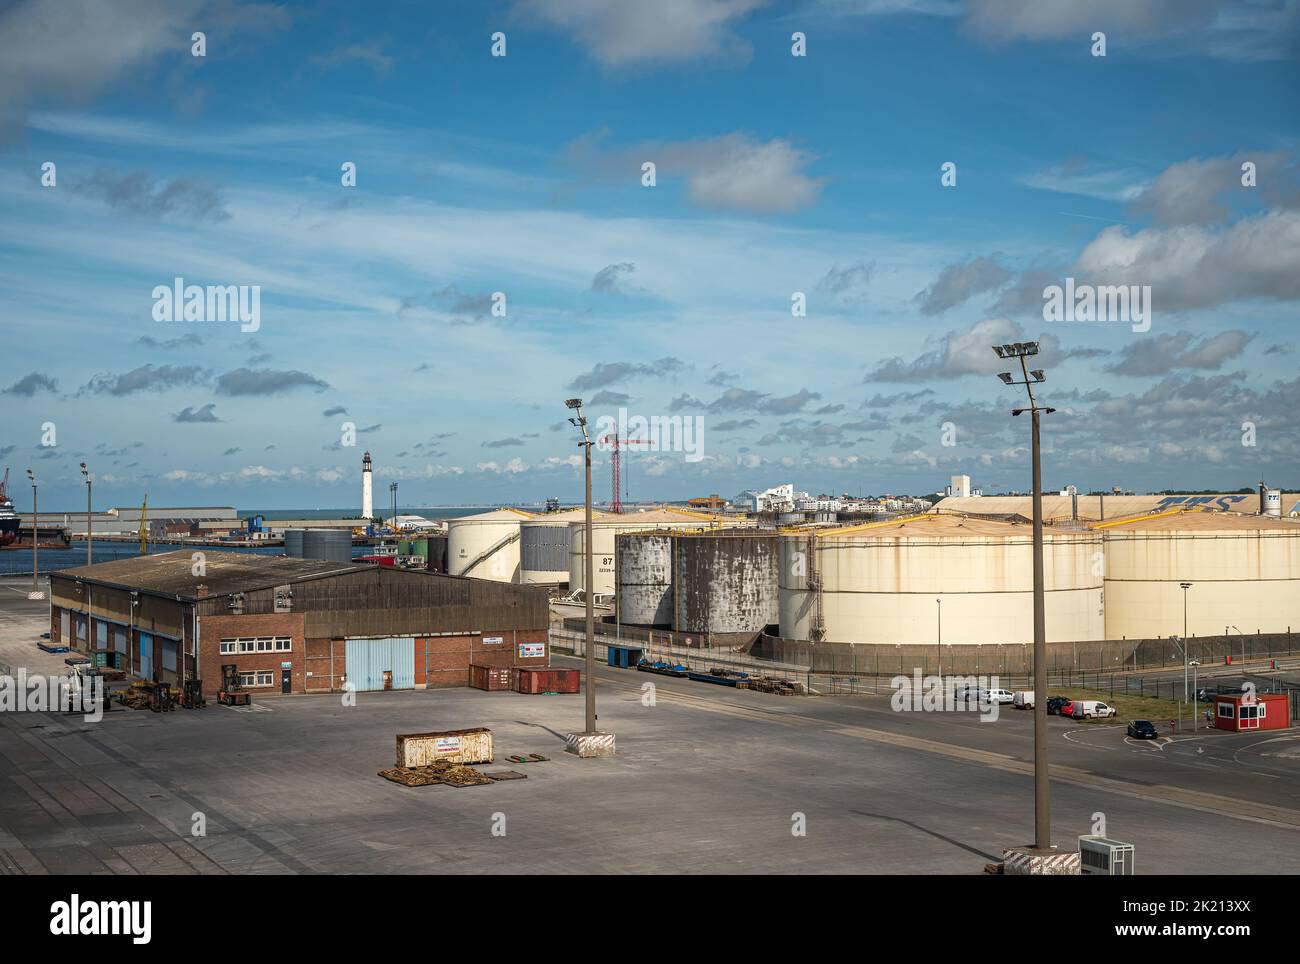 Europe, France, Dunkerque - July 9, 2022: Port scenery. BARRA SNM Terminal and office building in front of its large cylindrical petroleum tanks under Stock Photo